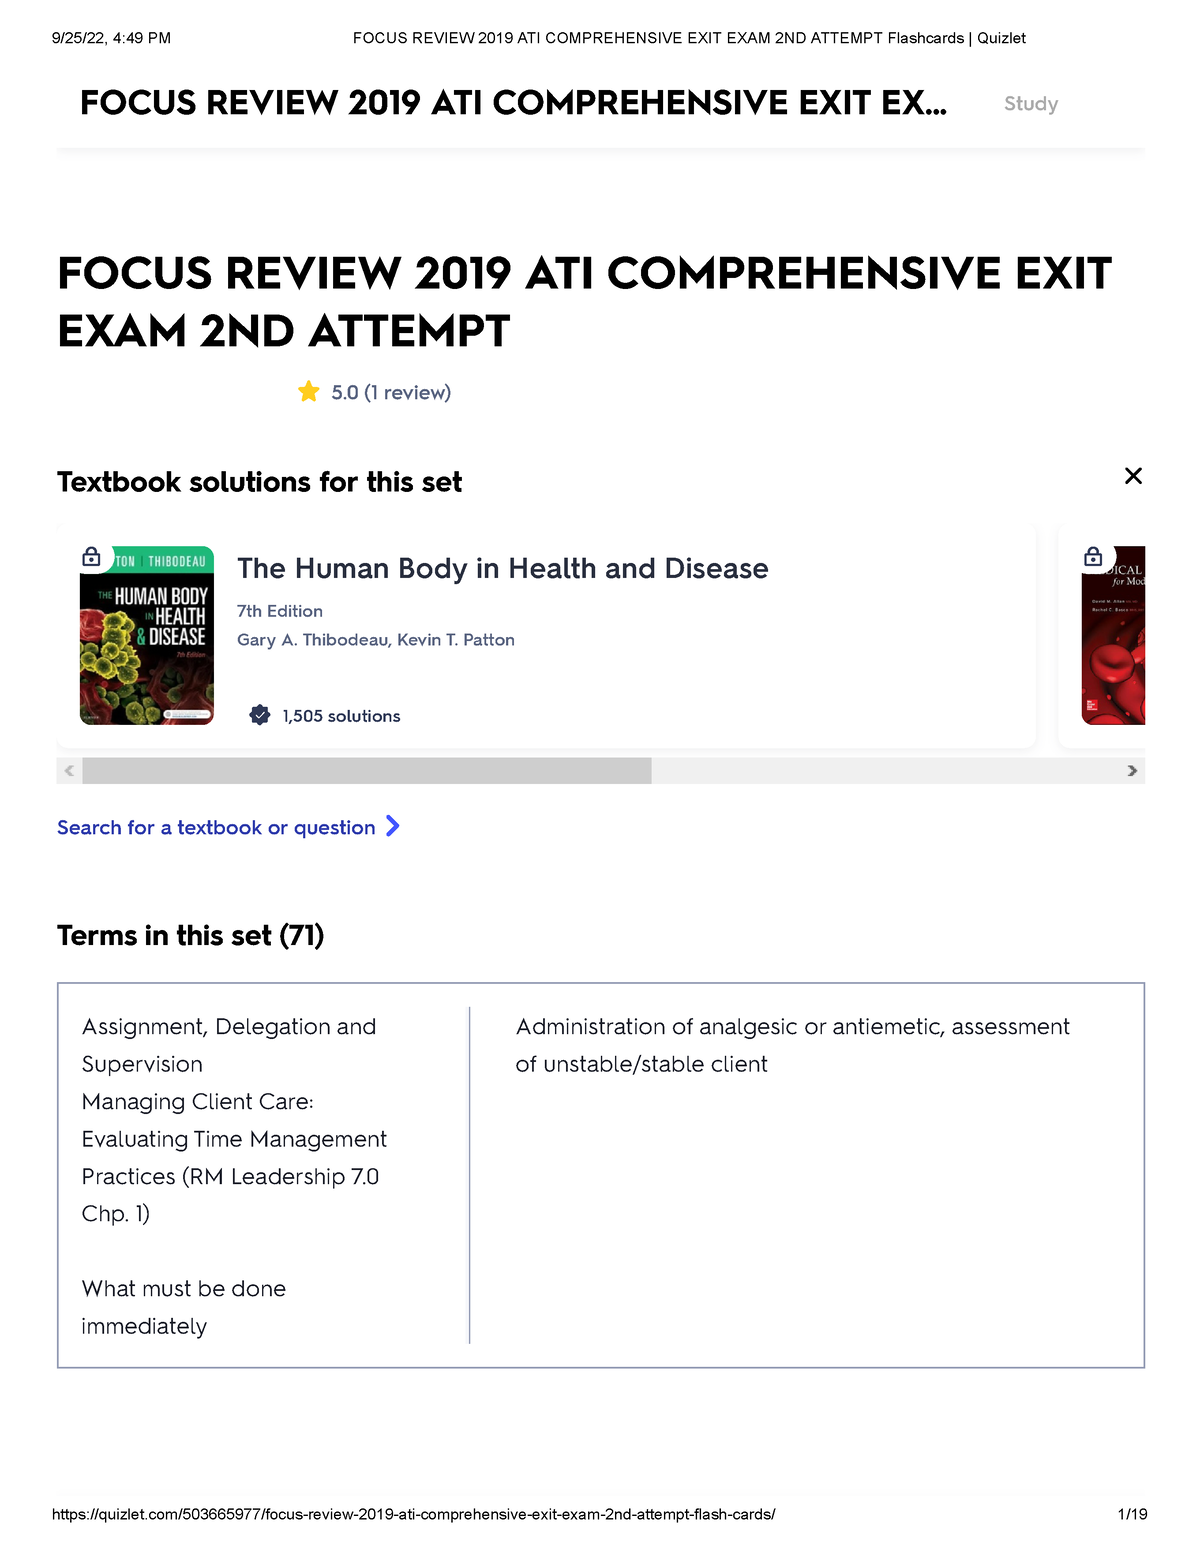 Focus Review 2019 ATI Comprehensive EXIT EXAM 2ND Attempt Flashcards